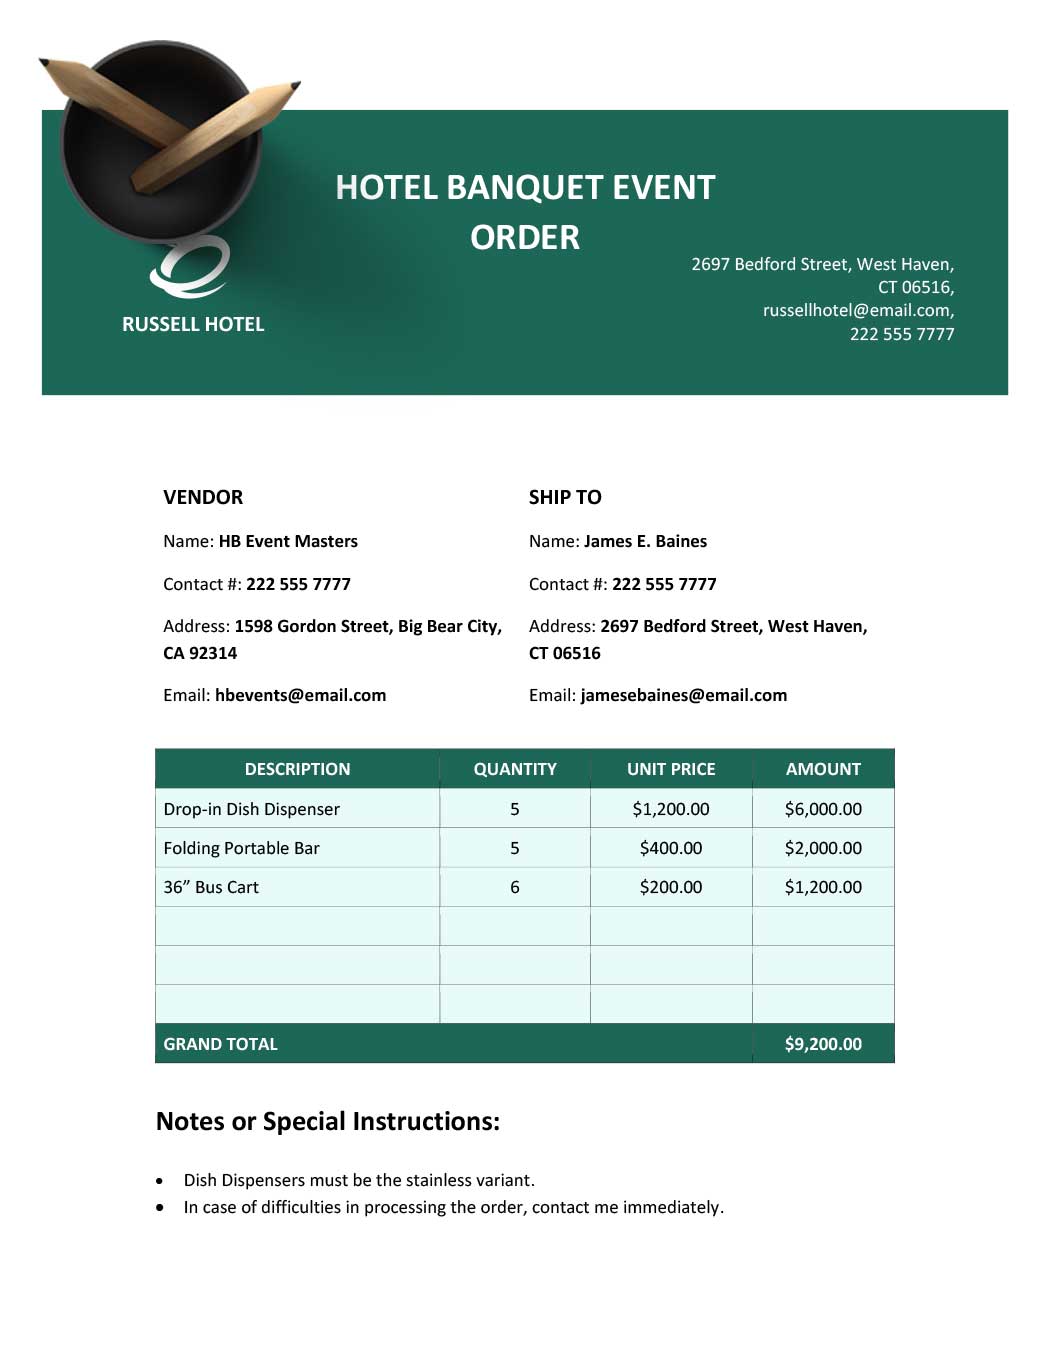 Hotel Banquet Event Order Template